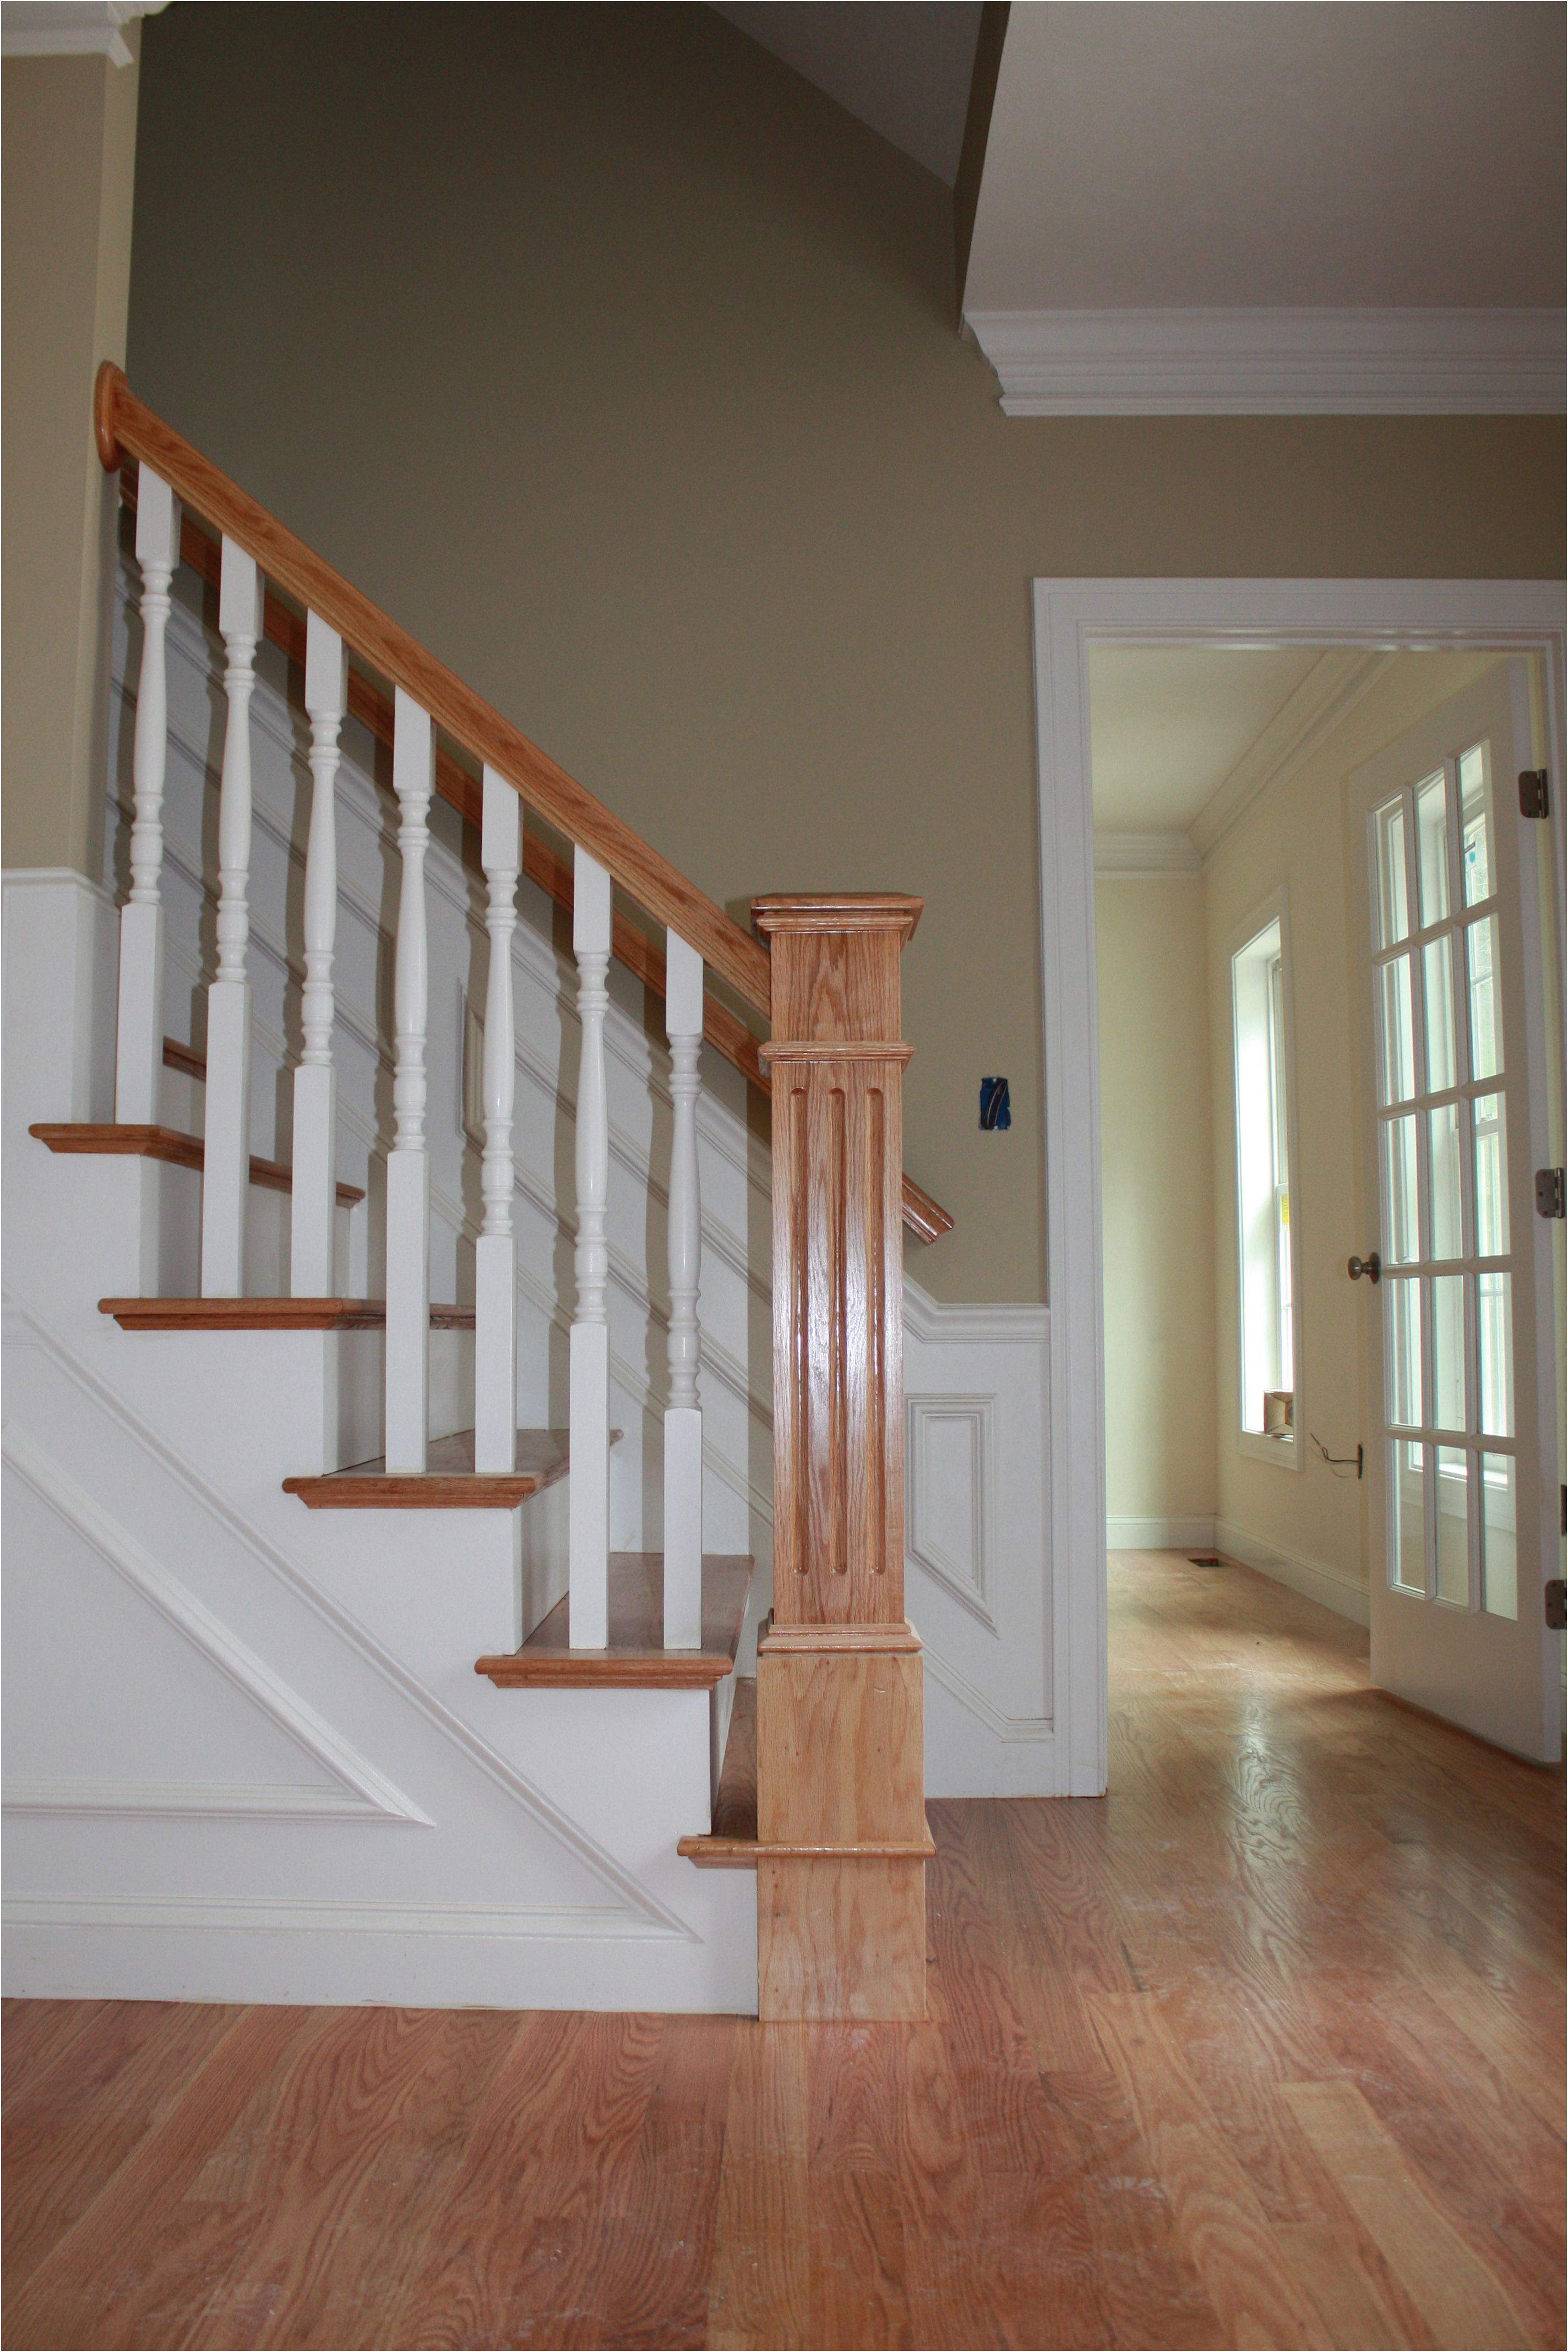 29 Stylish Rona Engineered Hardwood Flooring 2024 free download rona engineered hardwood flooring of oak stair treads rona elegant pw t apr12 by display pennywise issuu pertaining to oak stair treads rona beautiful modern staircase with zen posts and sta